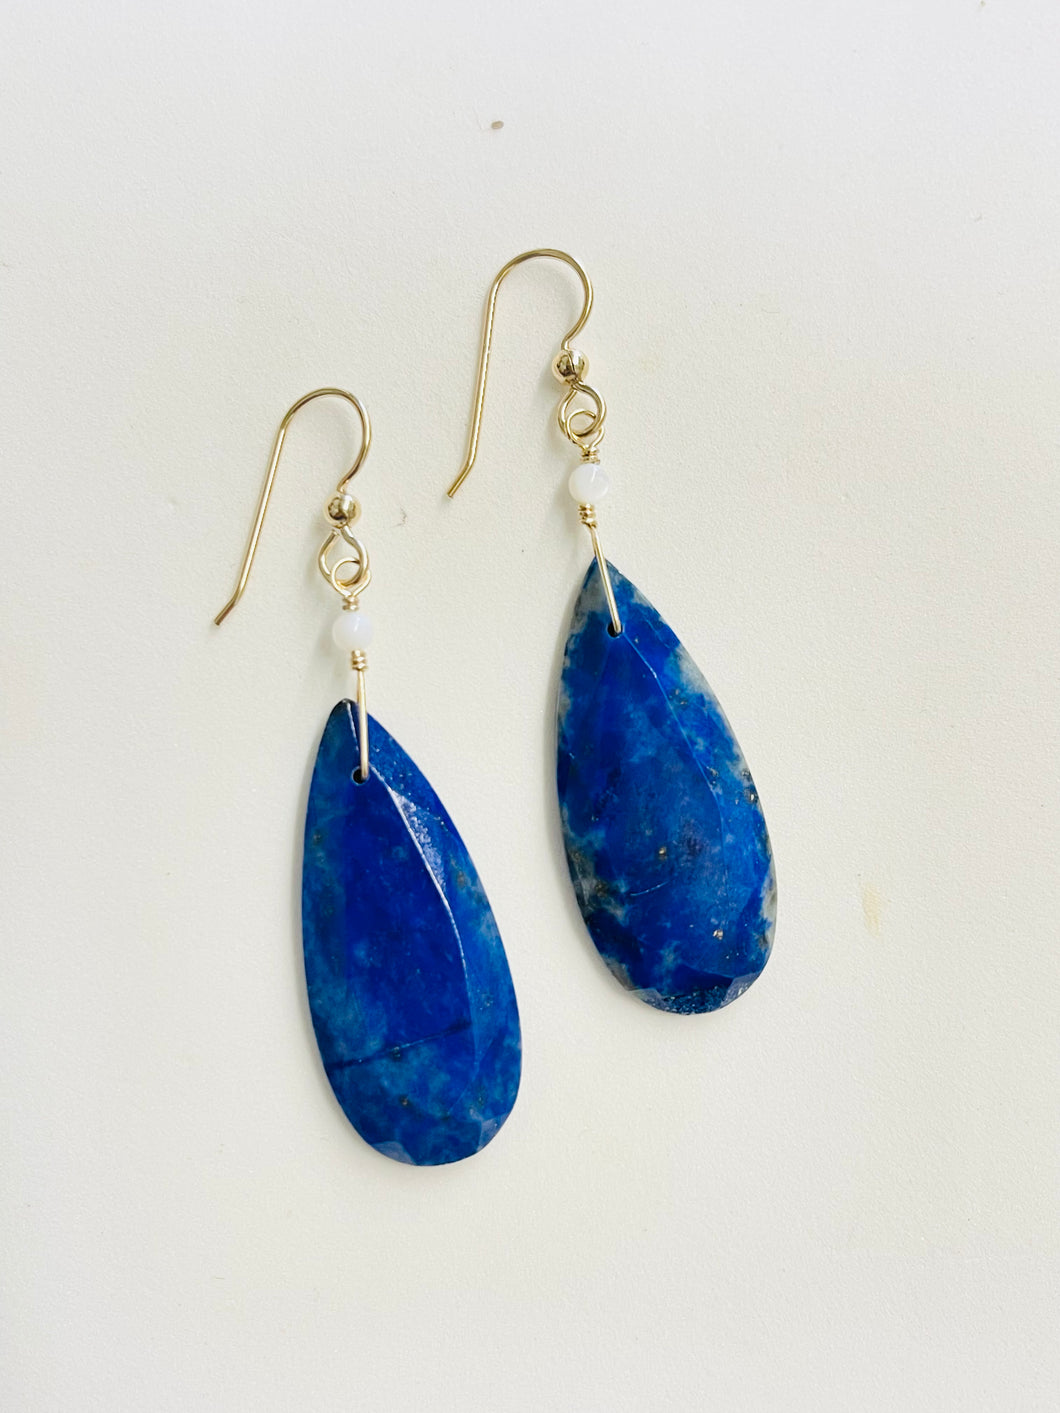 Earrings with long lapis